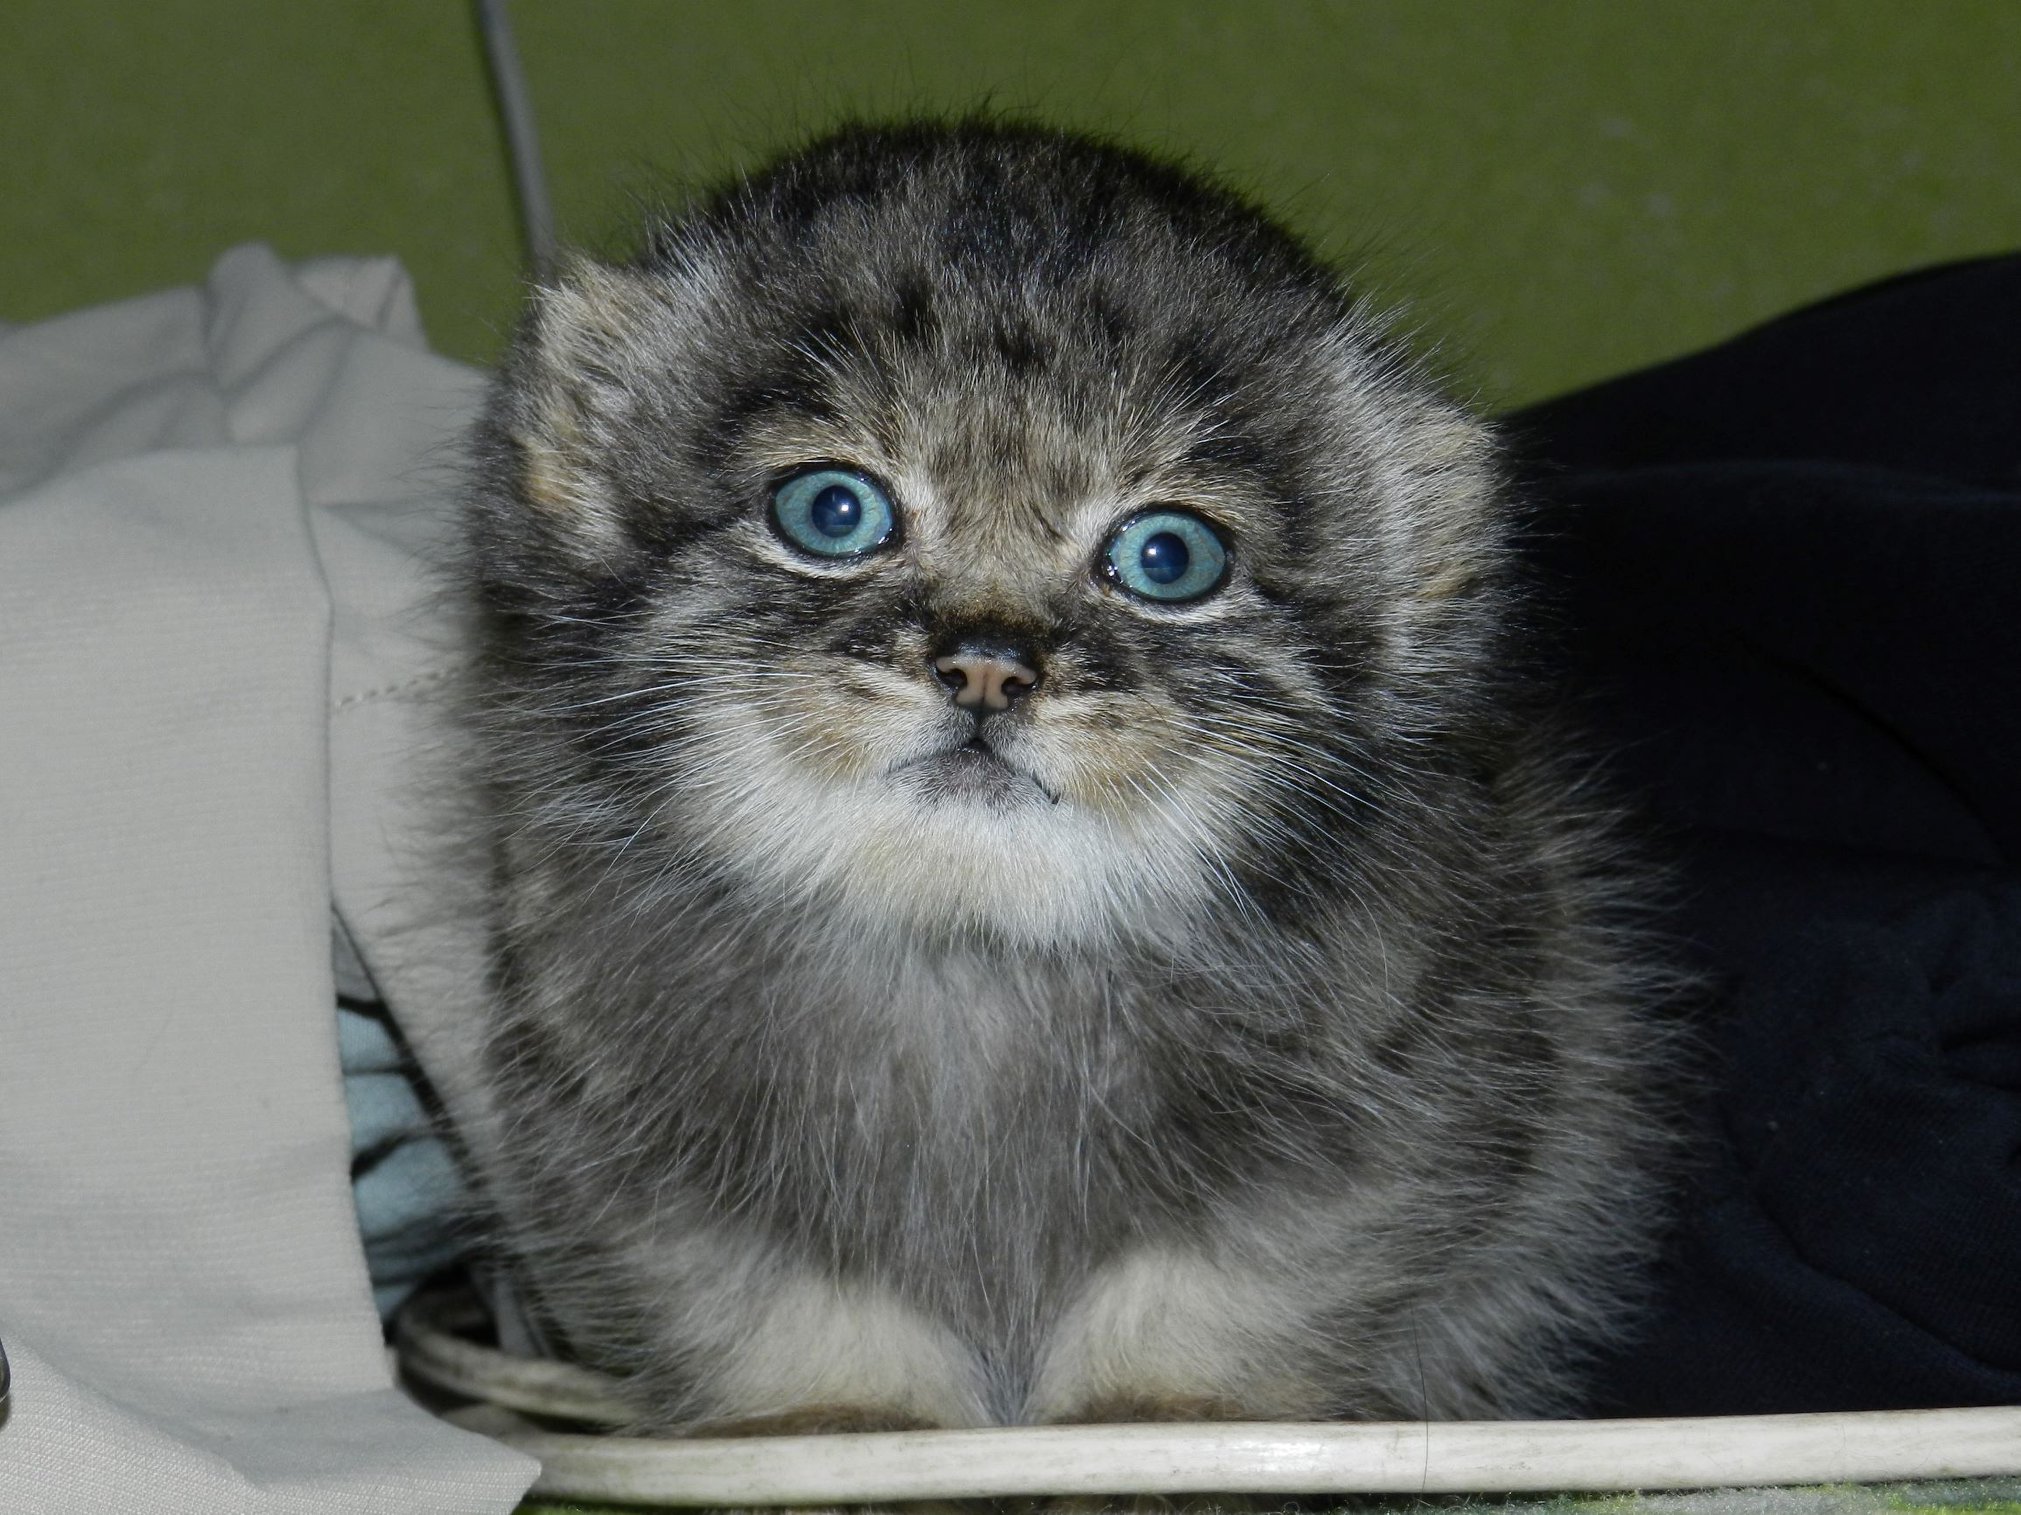 Maria Antonova on Twitter: "Really loved story of Dasha, the manul wildcat Cat) who was rescued as a baby and then left her rescuers for wild steppe when she